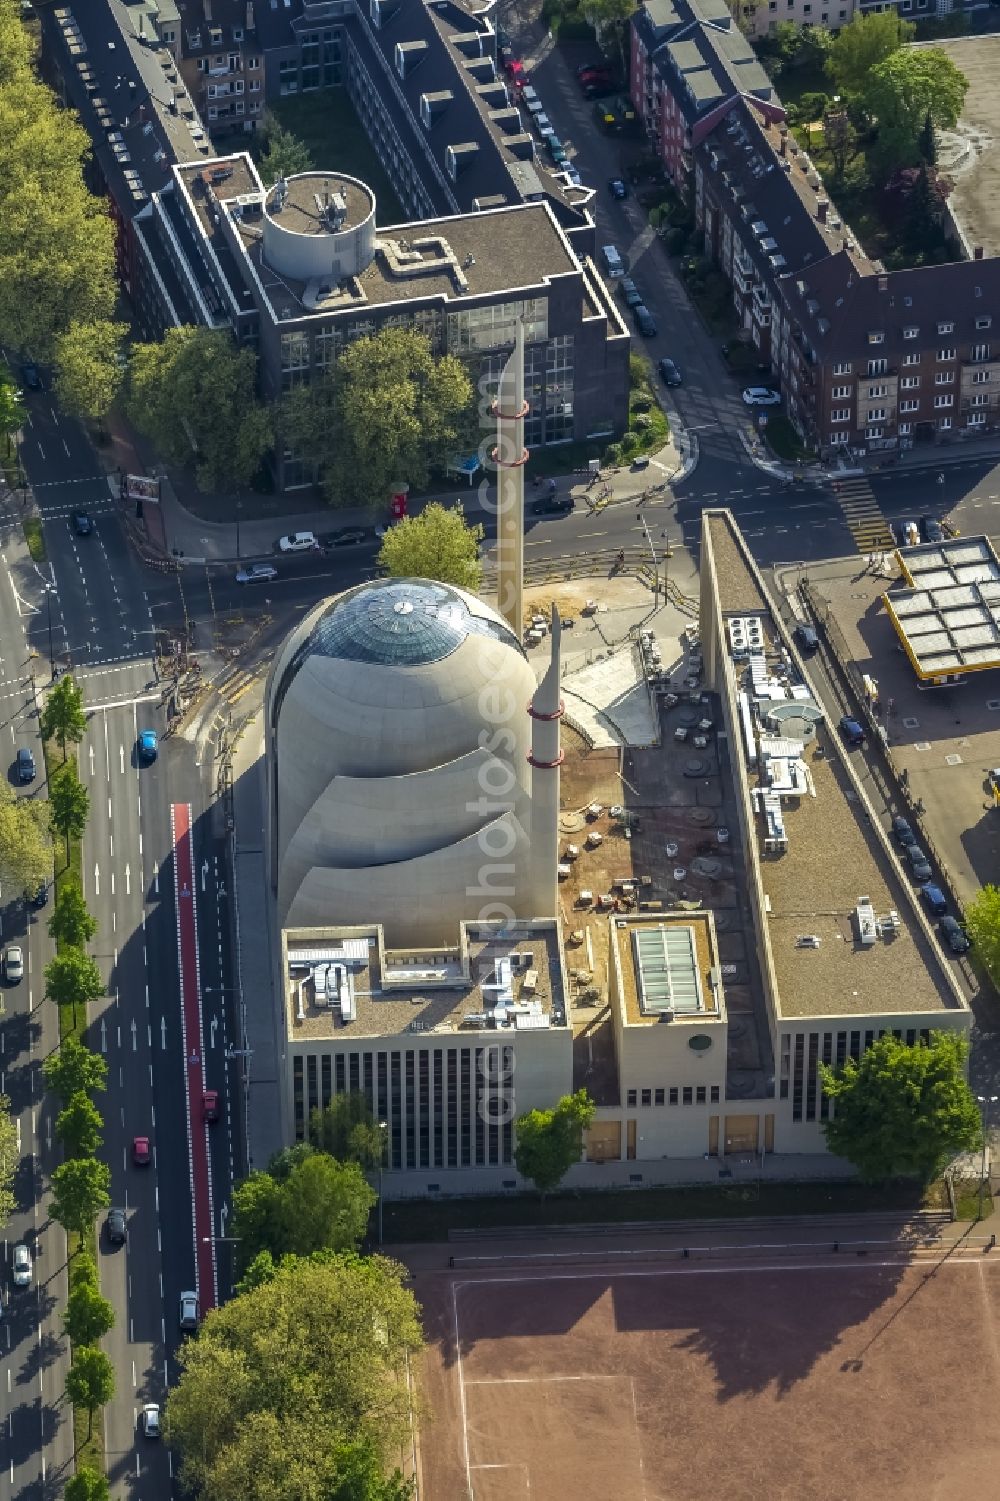 Köln from above - Building the DITIB central mosque in Cologne, North Rhine-Westphalia